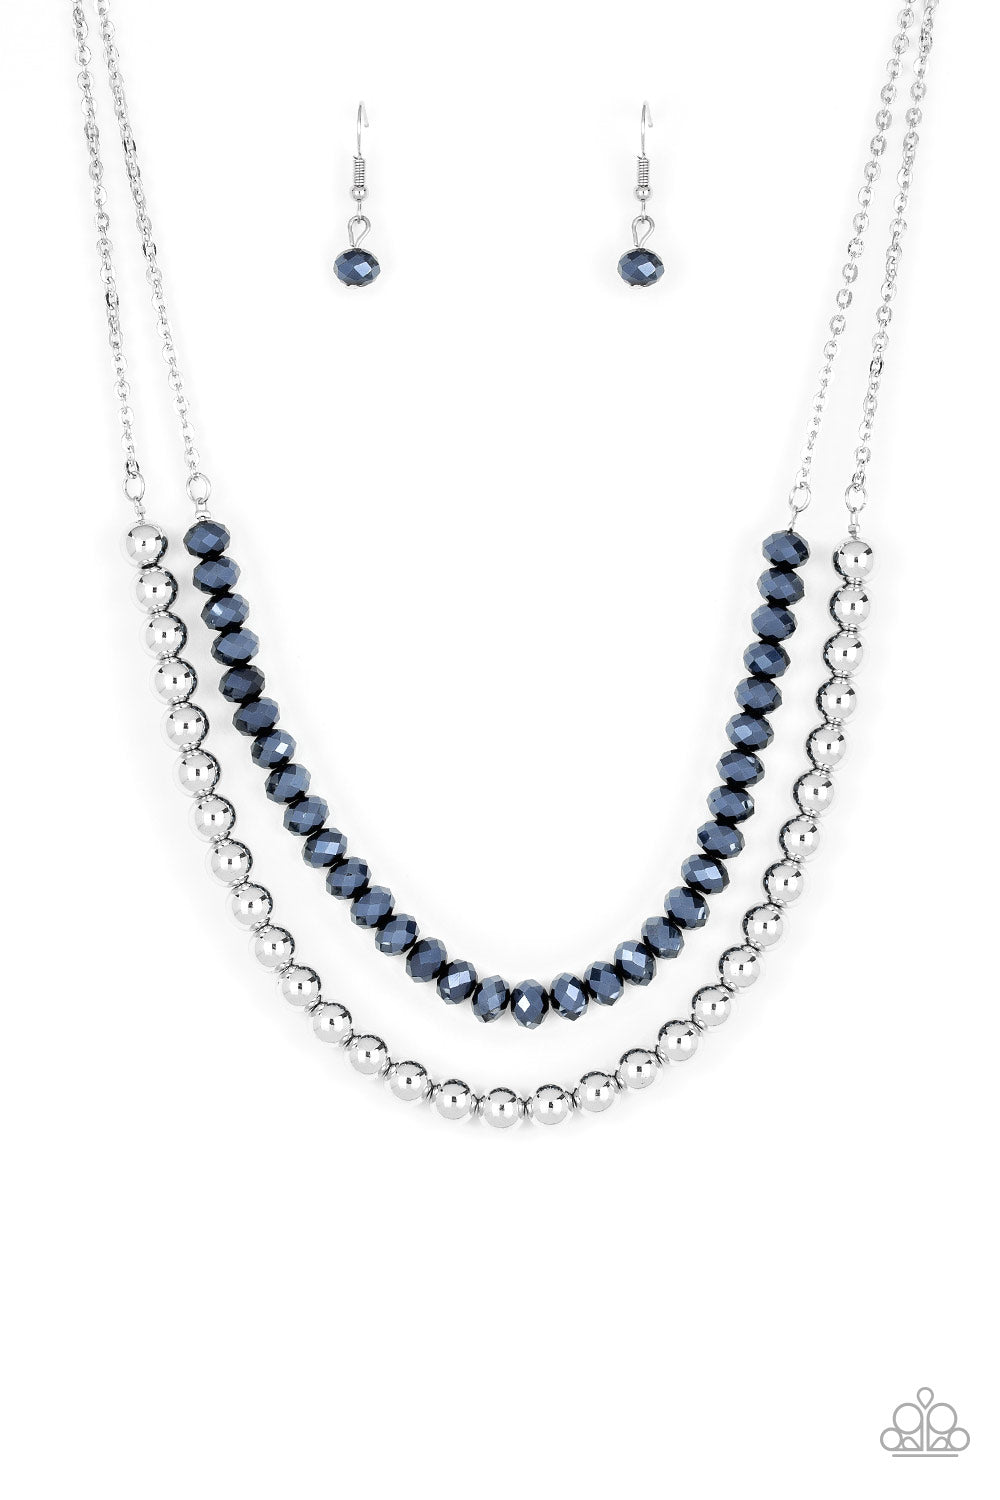 COLOR OF THE DAY - BLUE NECKLACE